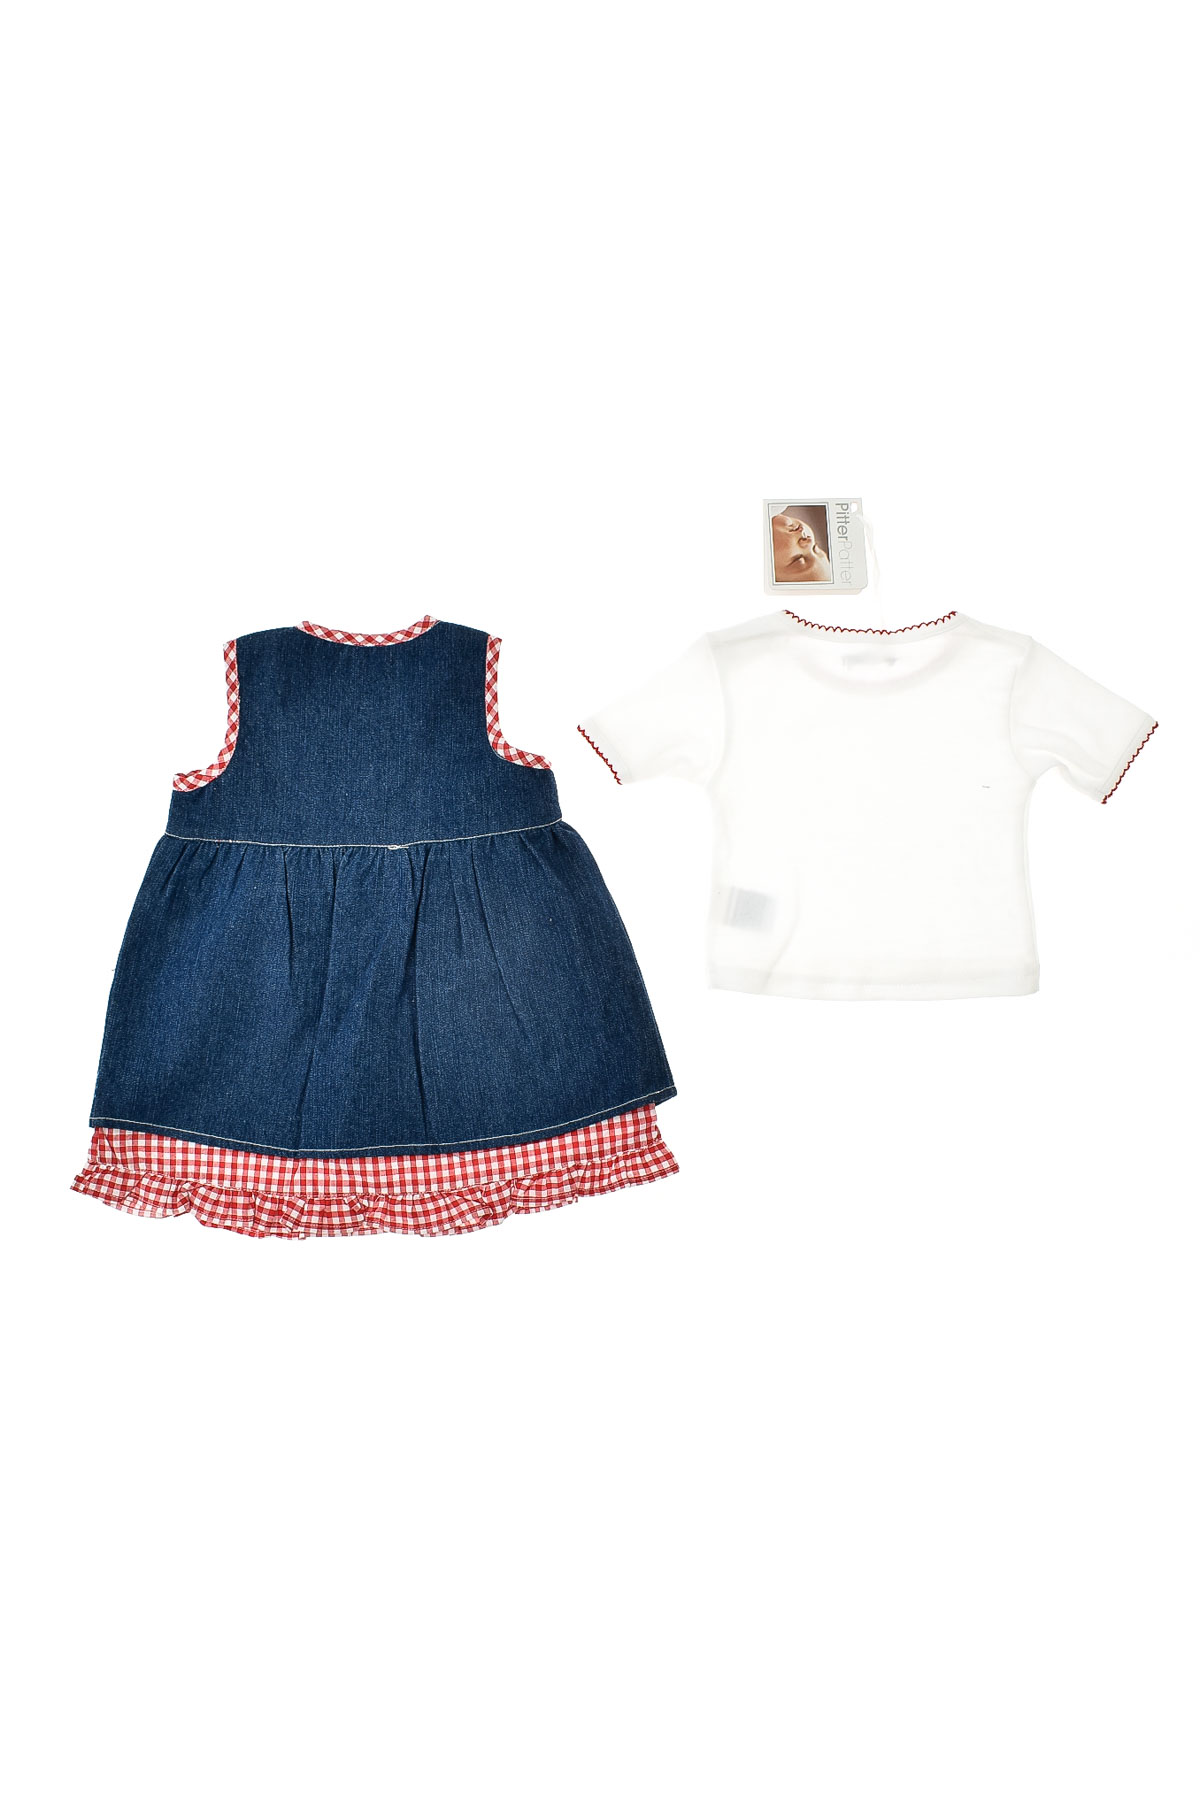 Baby's dress - Pitter Patter - 1